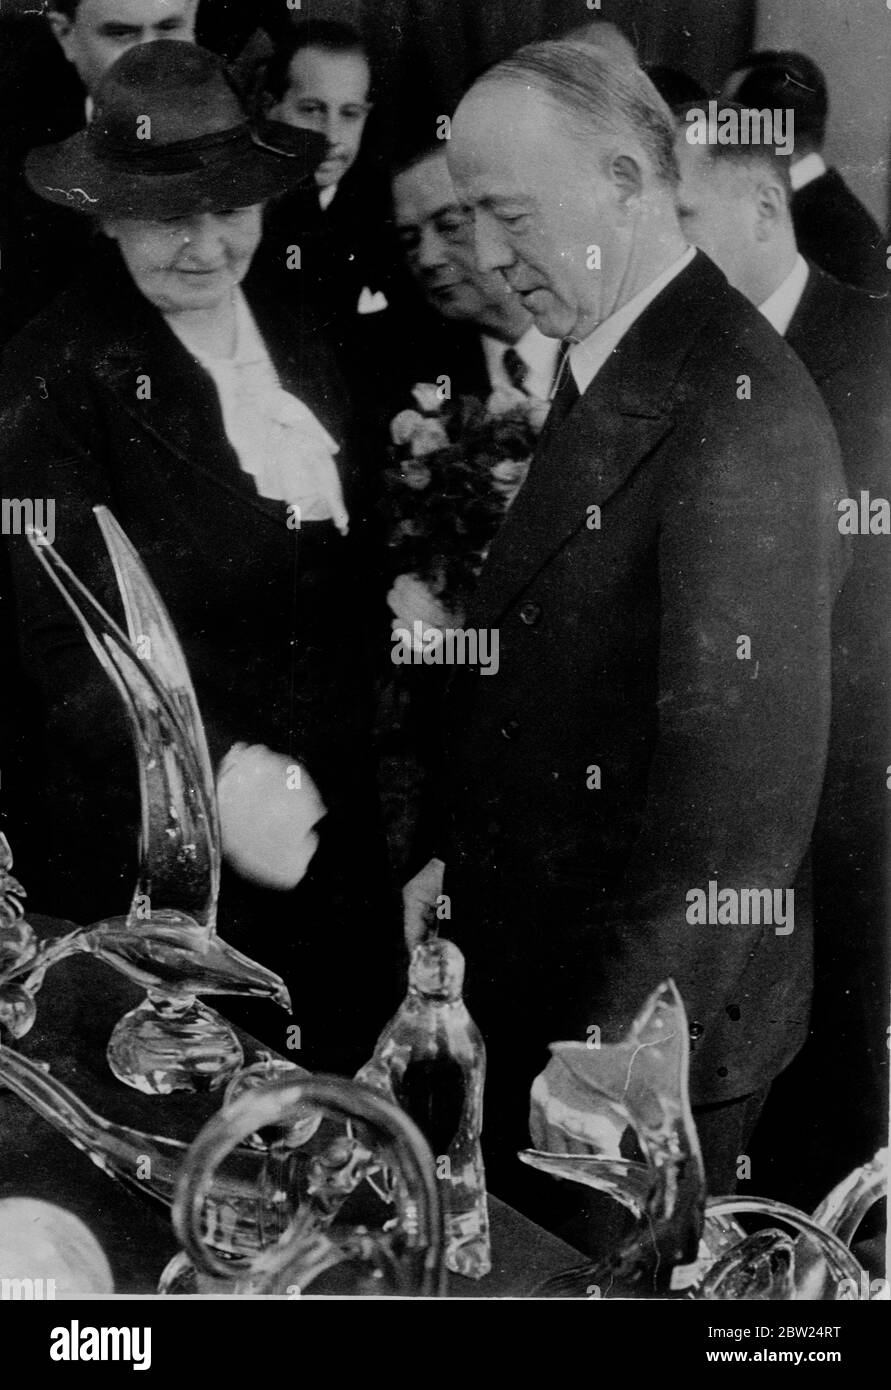 Lord Runcimantook brief relaxation from the strain of mediation in the Sudeten-German-Czechoslovak dispute when he visited Prague fair with Lady Runciman. Photo shows: Lord and Lady Runciman inspecting exhibits at the fair. 9 September 1938 Stock Photo